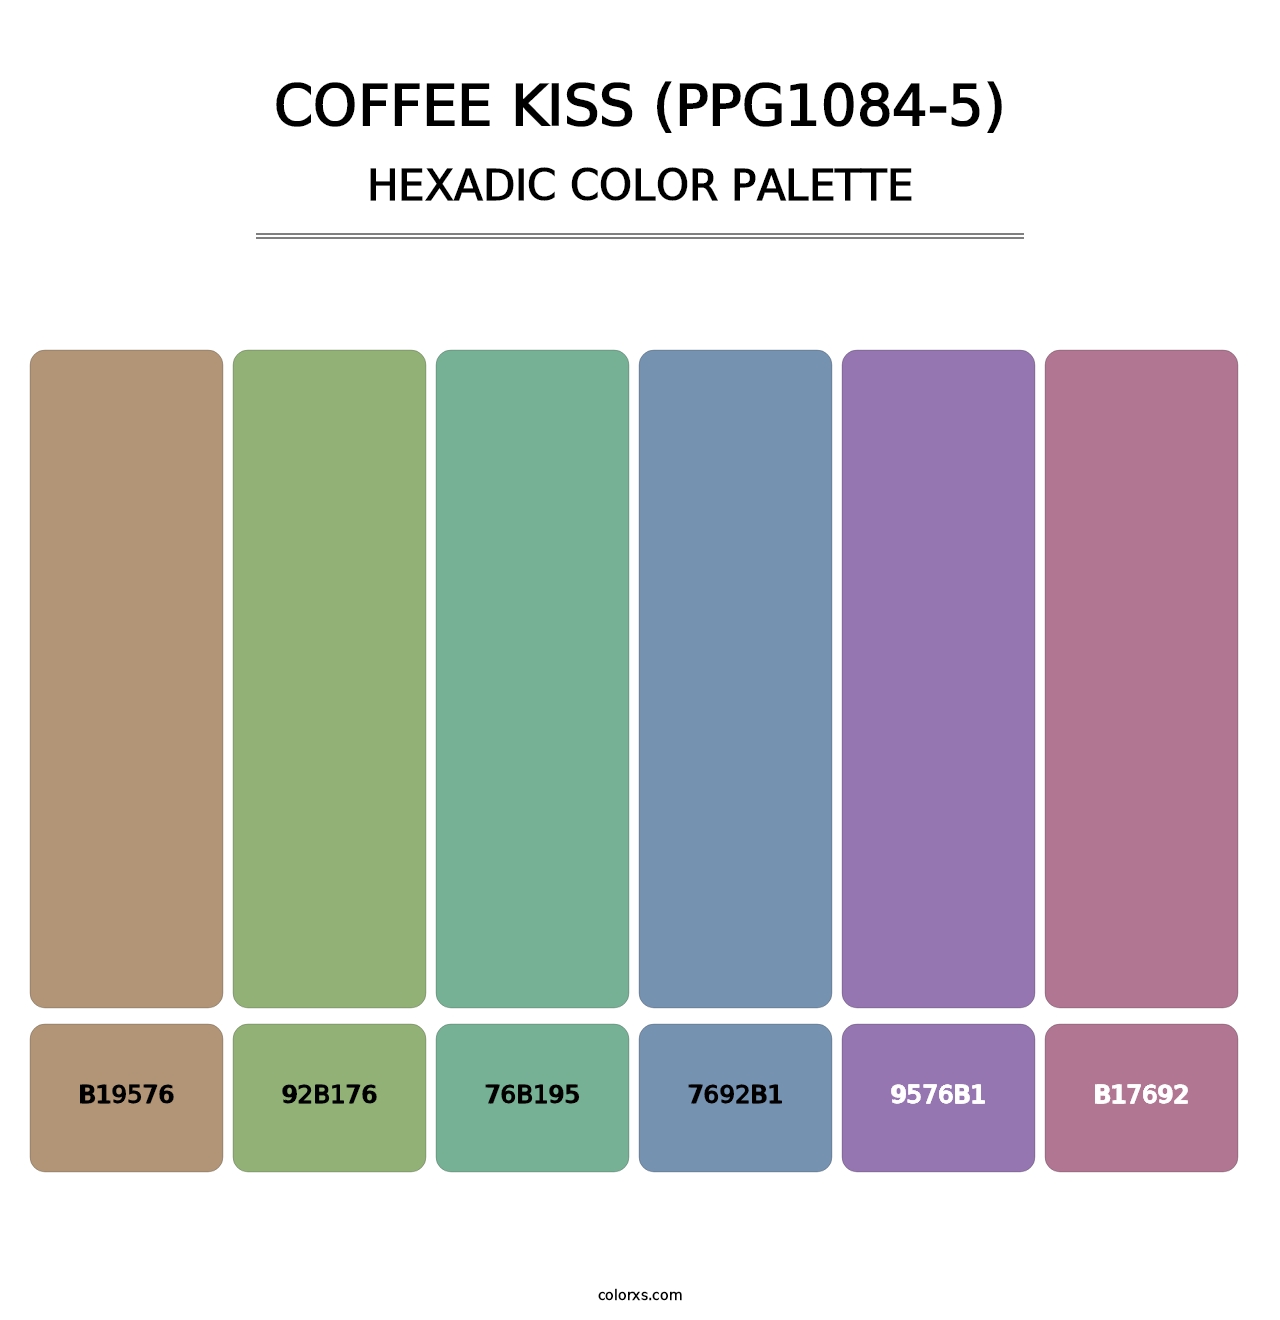 Coffee Kiss (PPG1084-5) - Hexadic Color Palette